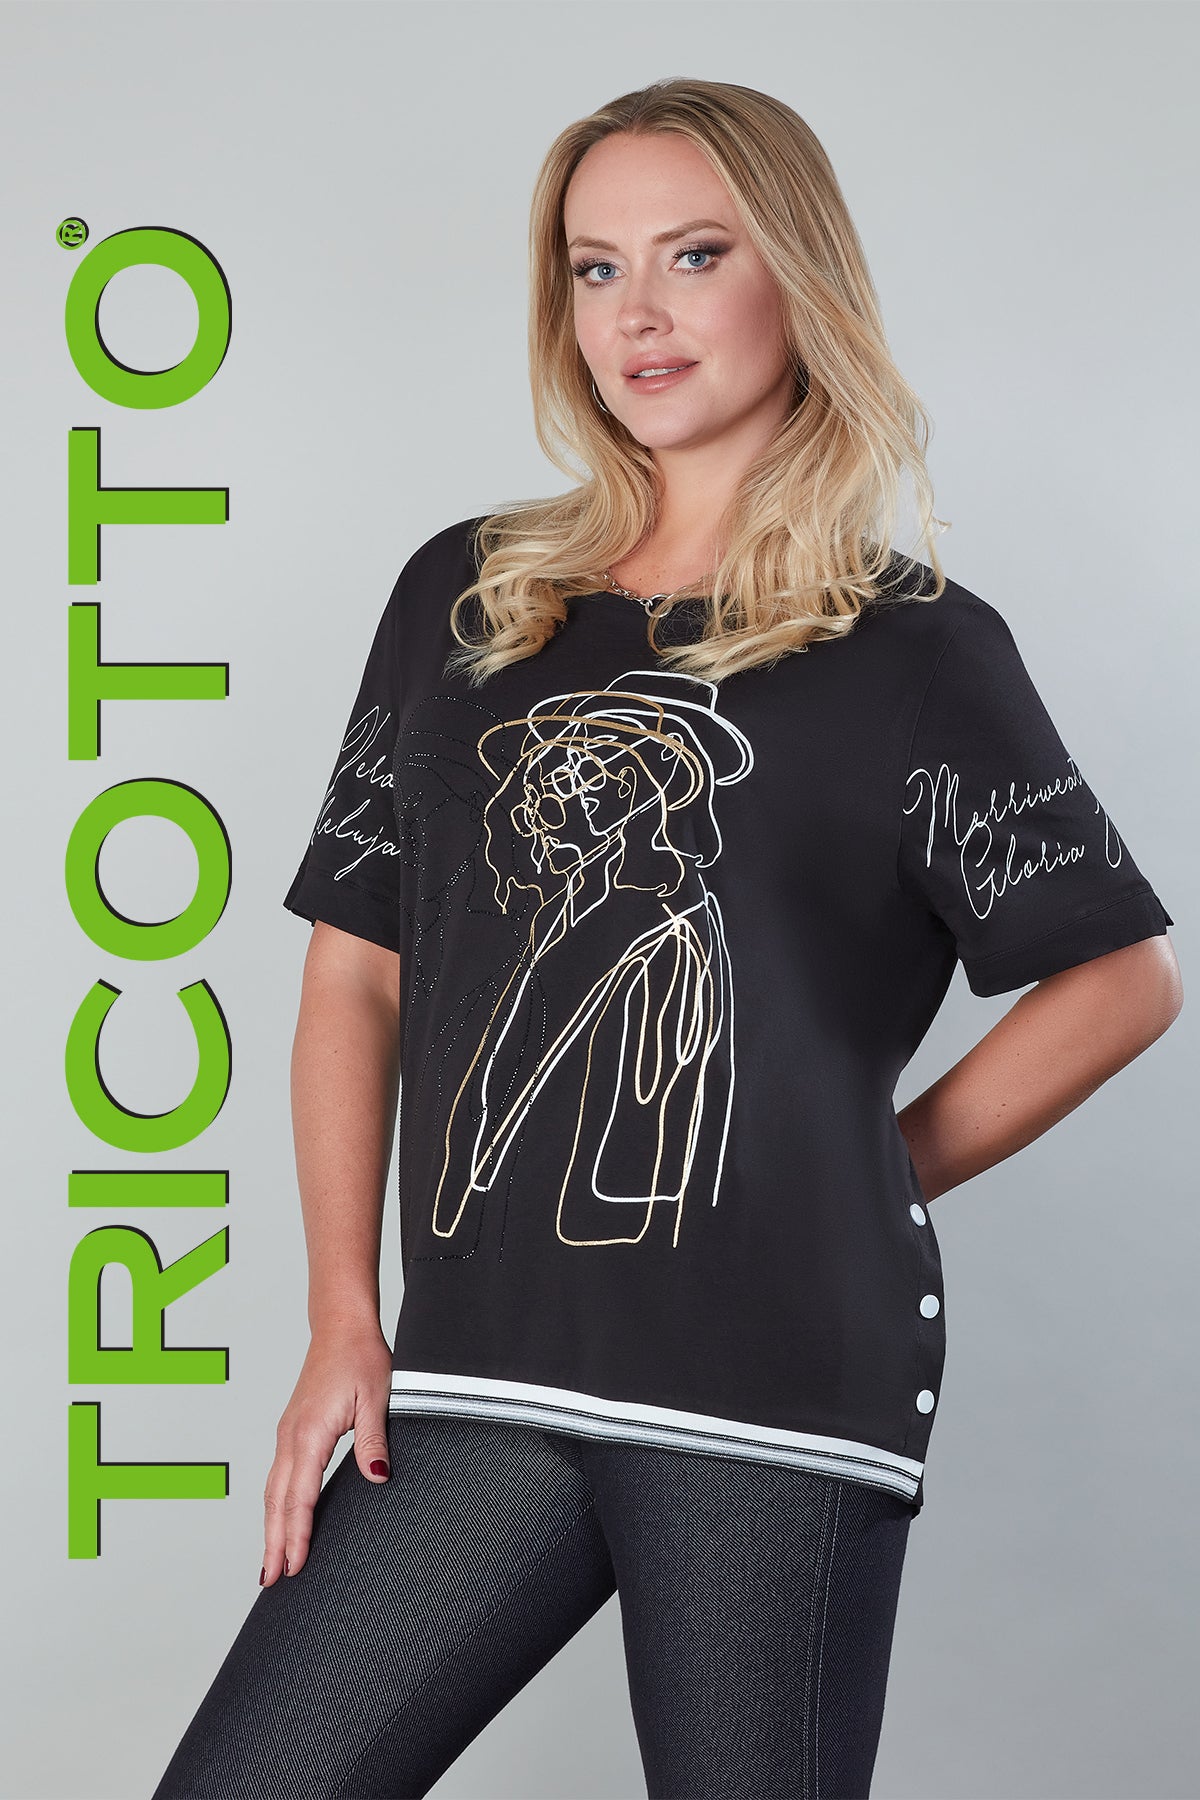 Tricotto Black-Gold Tunic With Sequin Fashionista Front Detail